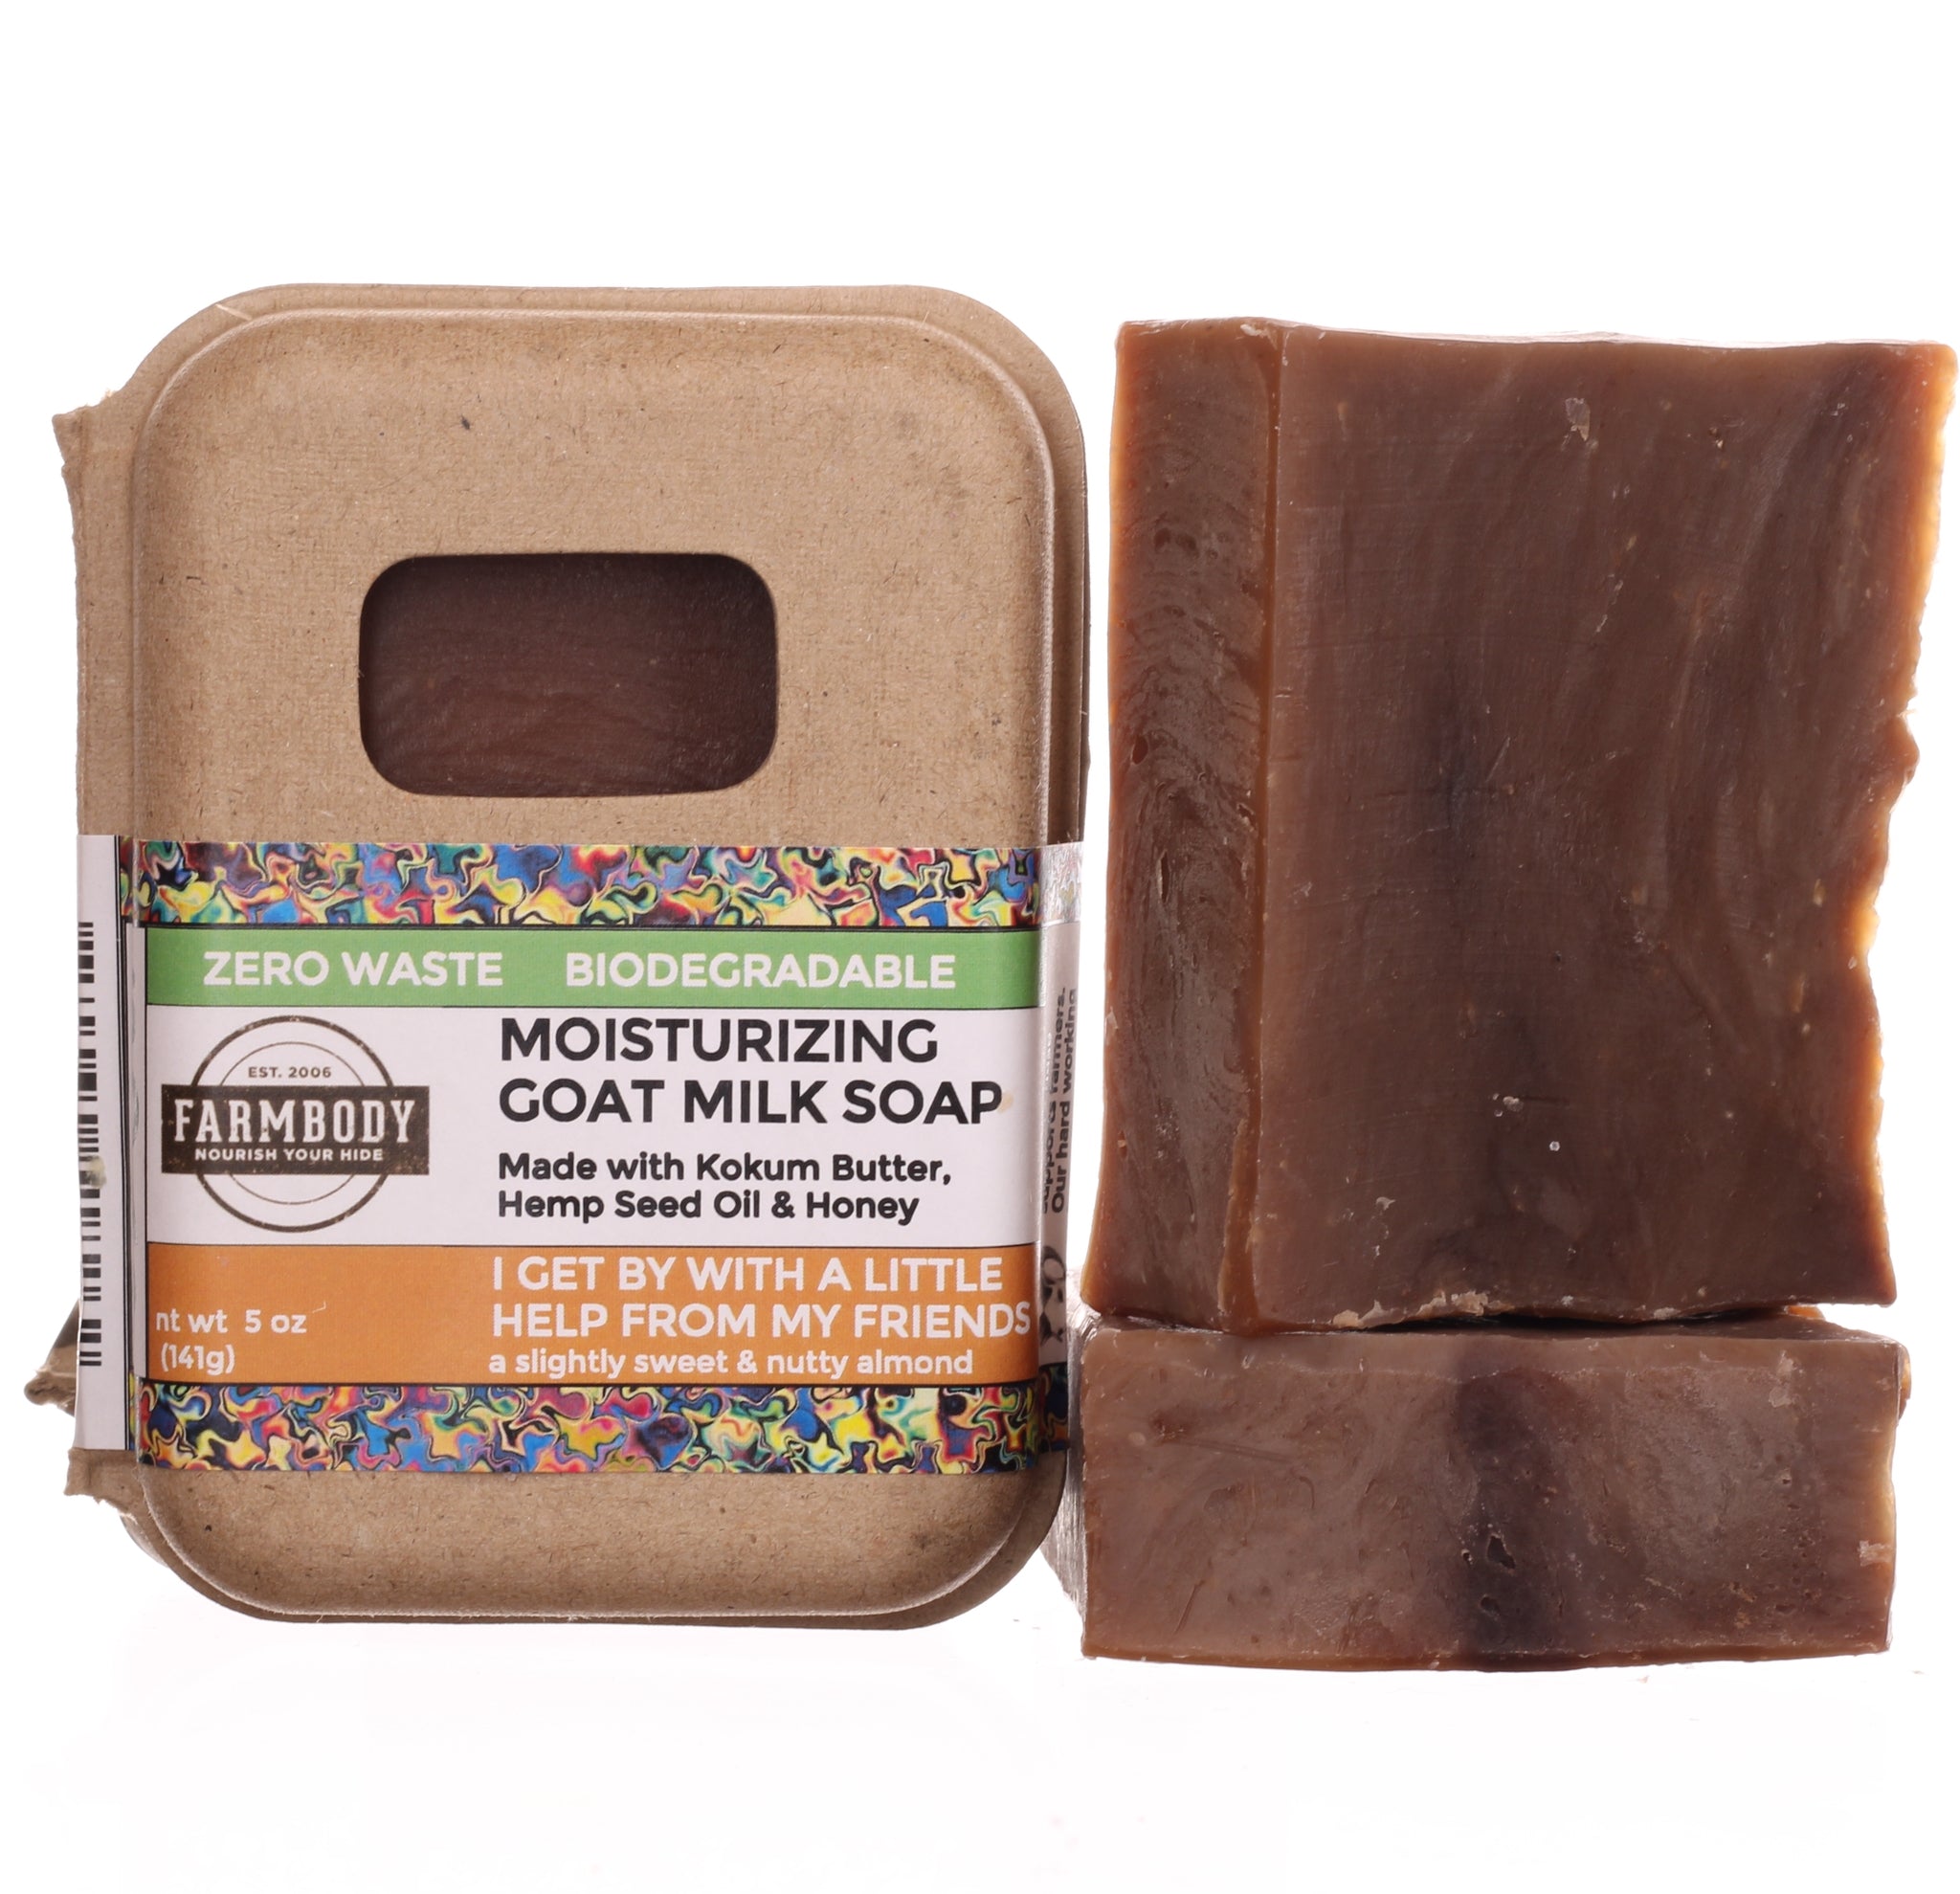 Moisturizing Goat Milk Bar Soap for Sensitive Skin | I GET BY WITH A LITTLE HELP FROM MY FRIENDS - Farmbody